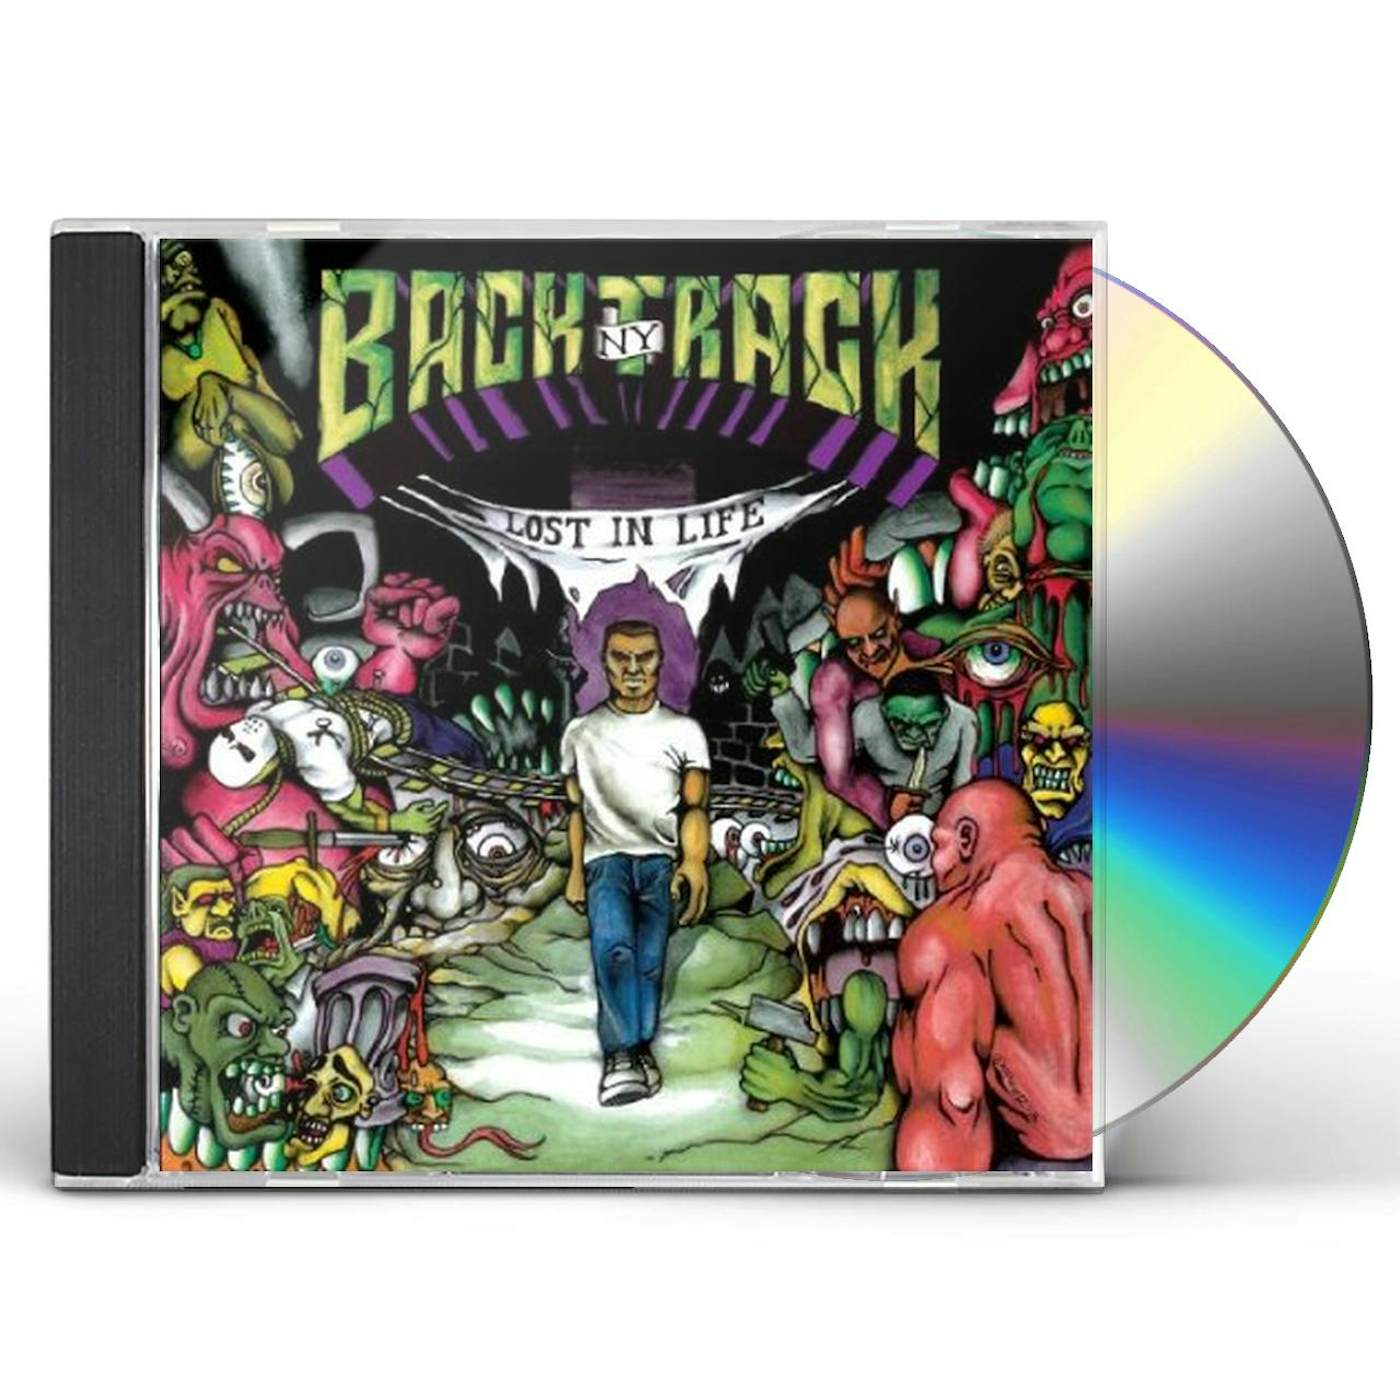 Backtrack LOST IN LIFE CD